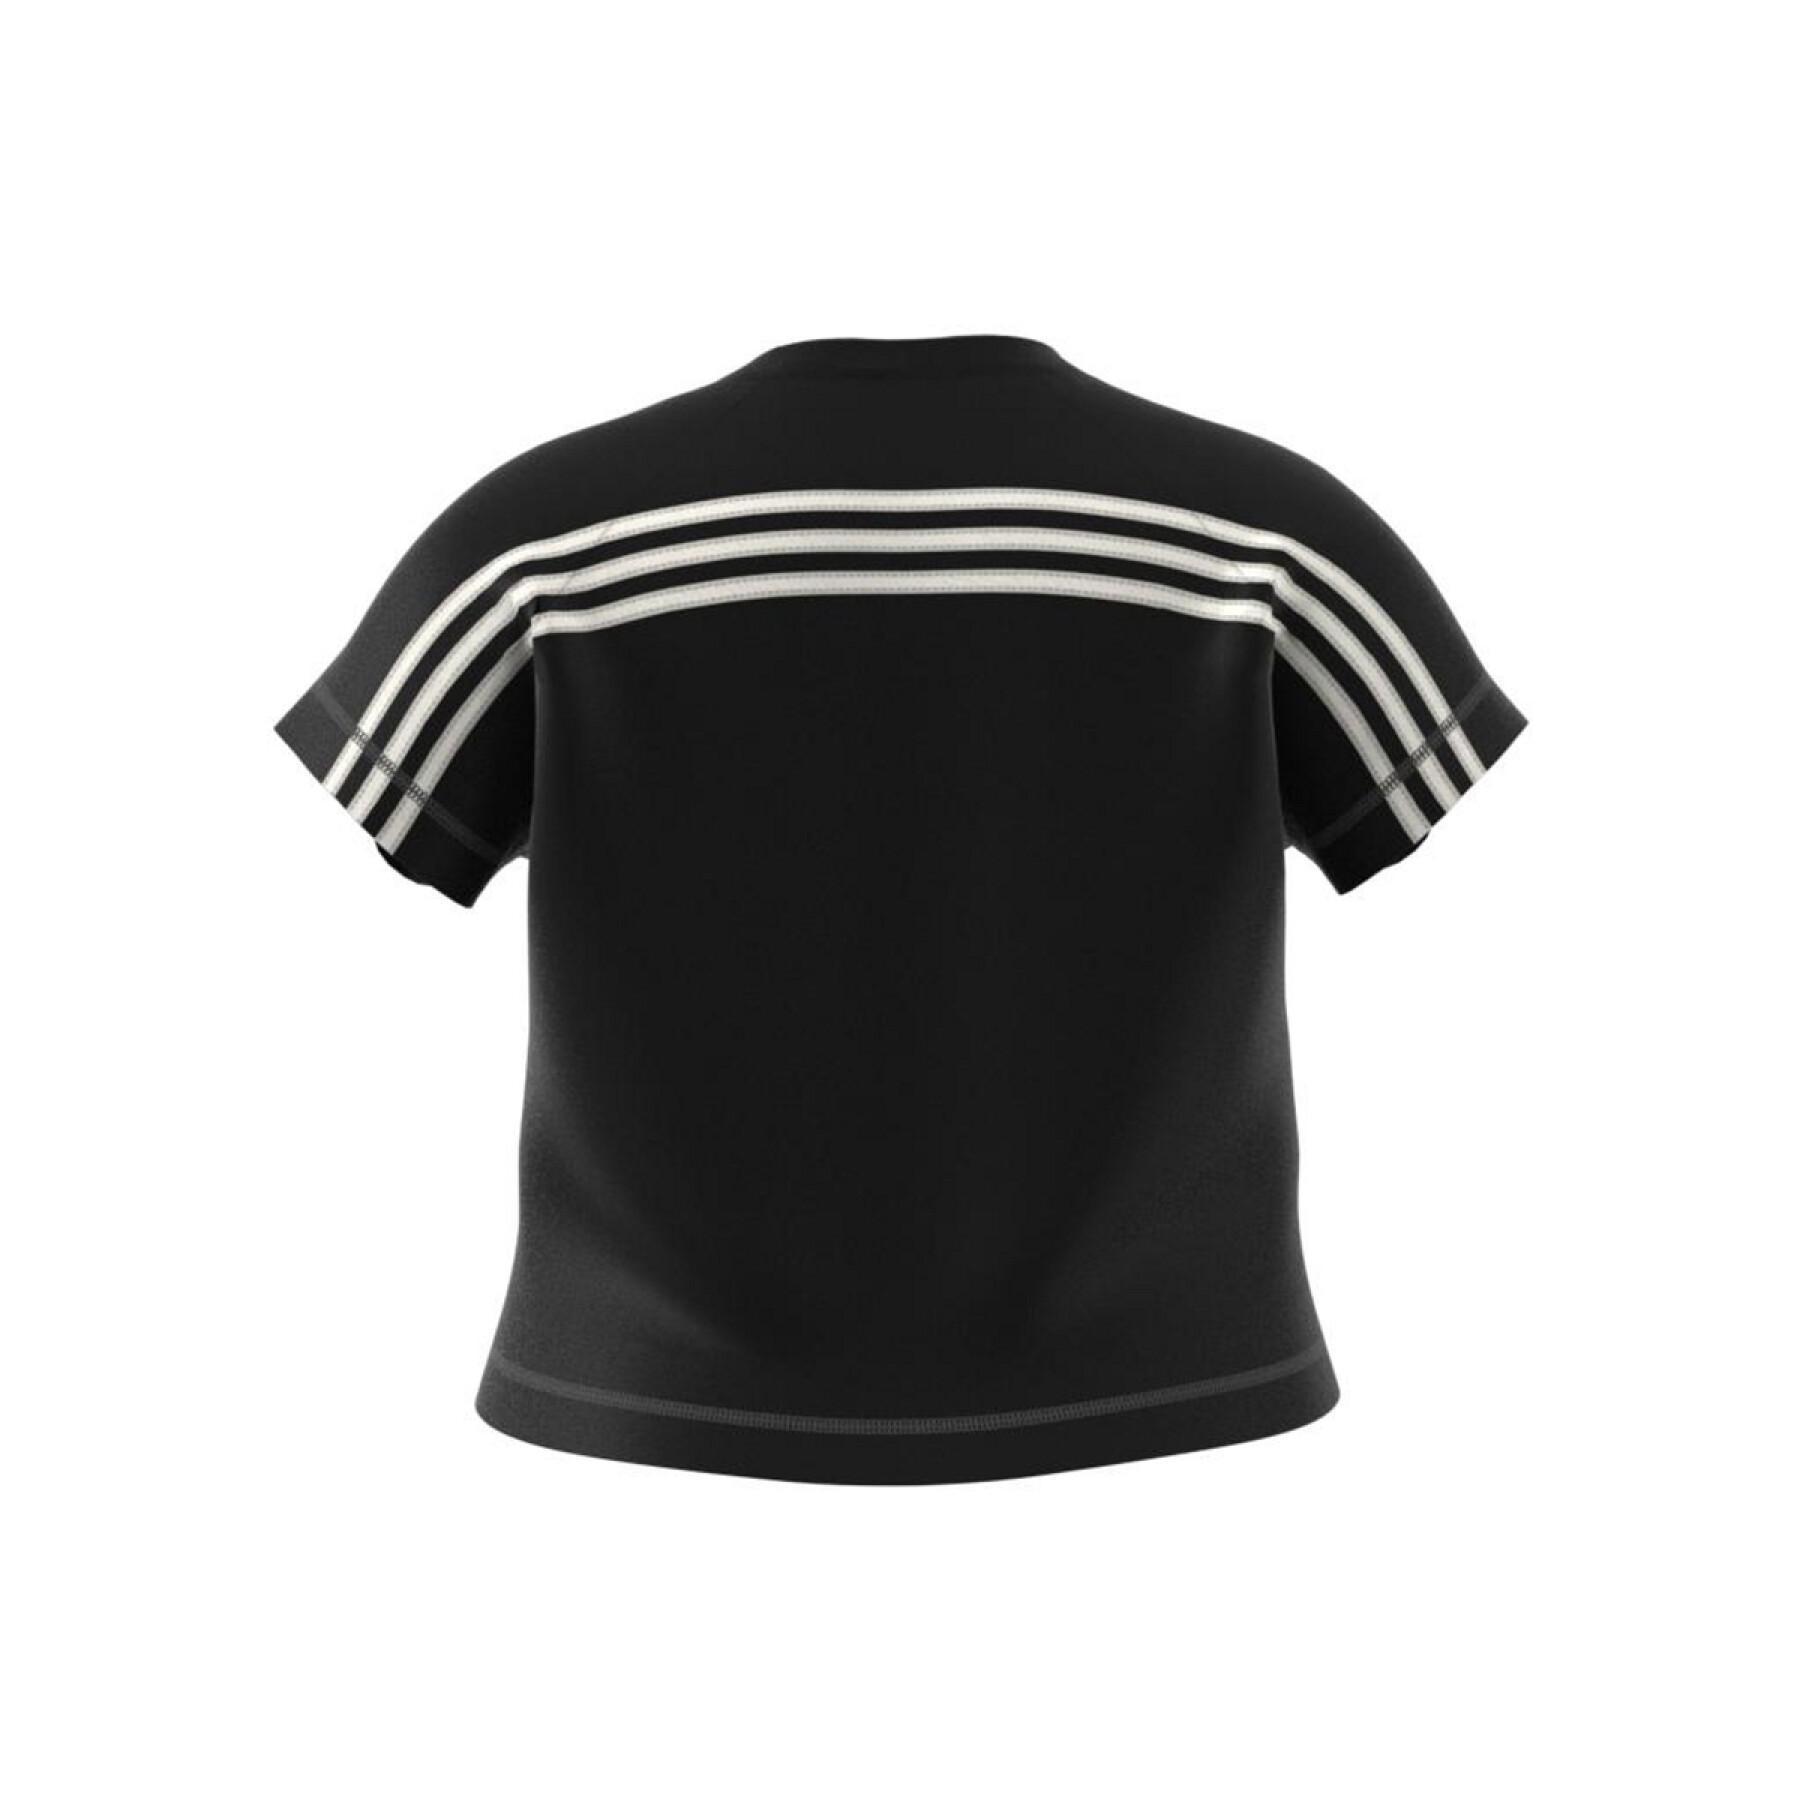 Maillot corto de mujer adidas Sportswear Recycled Cotton